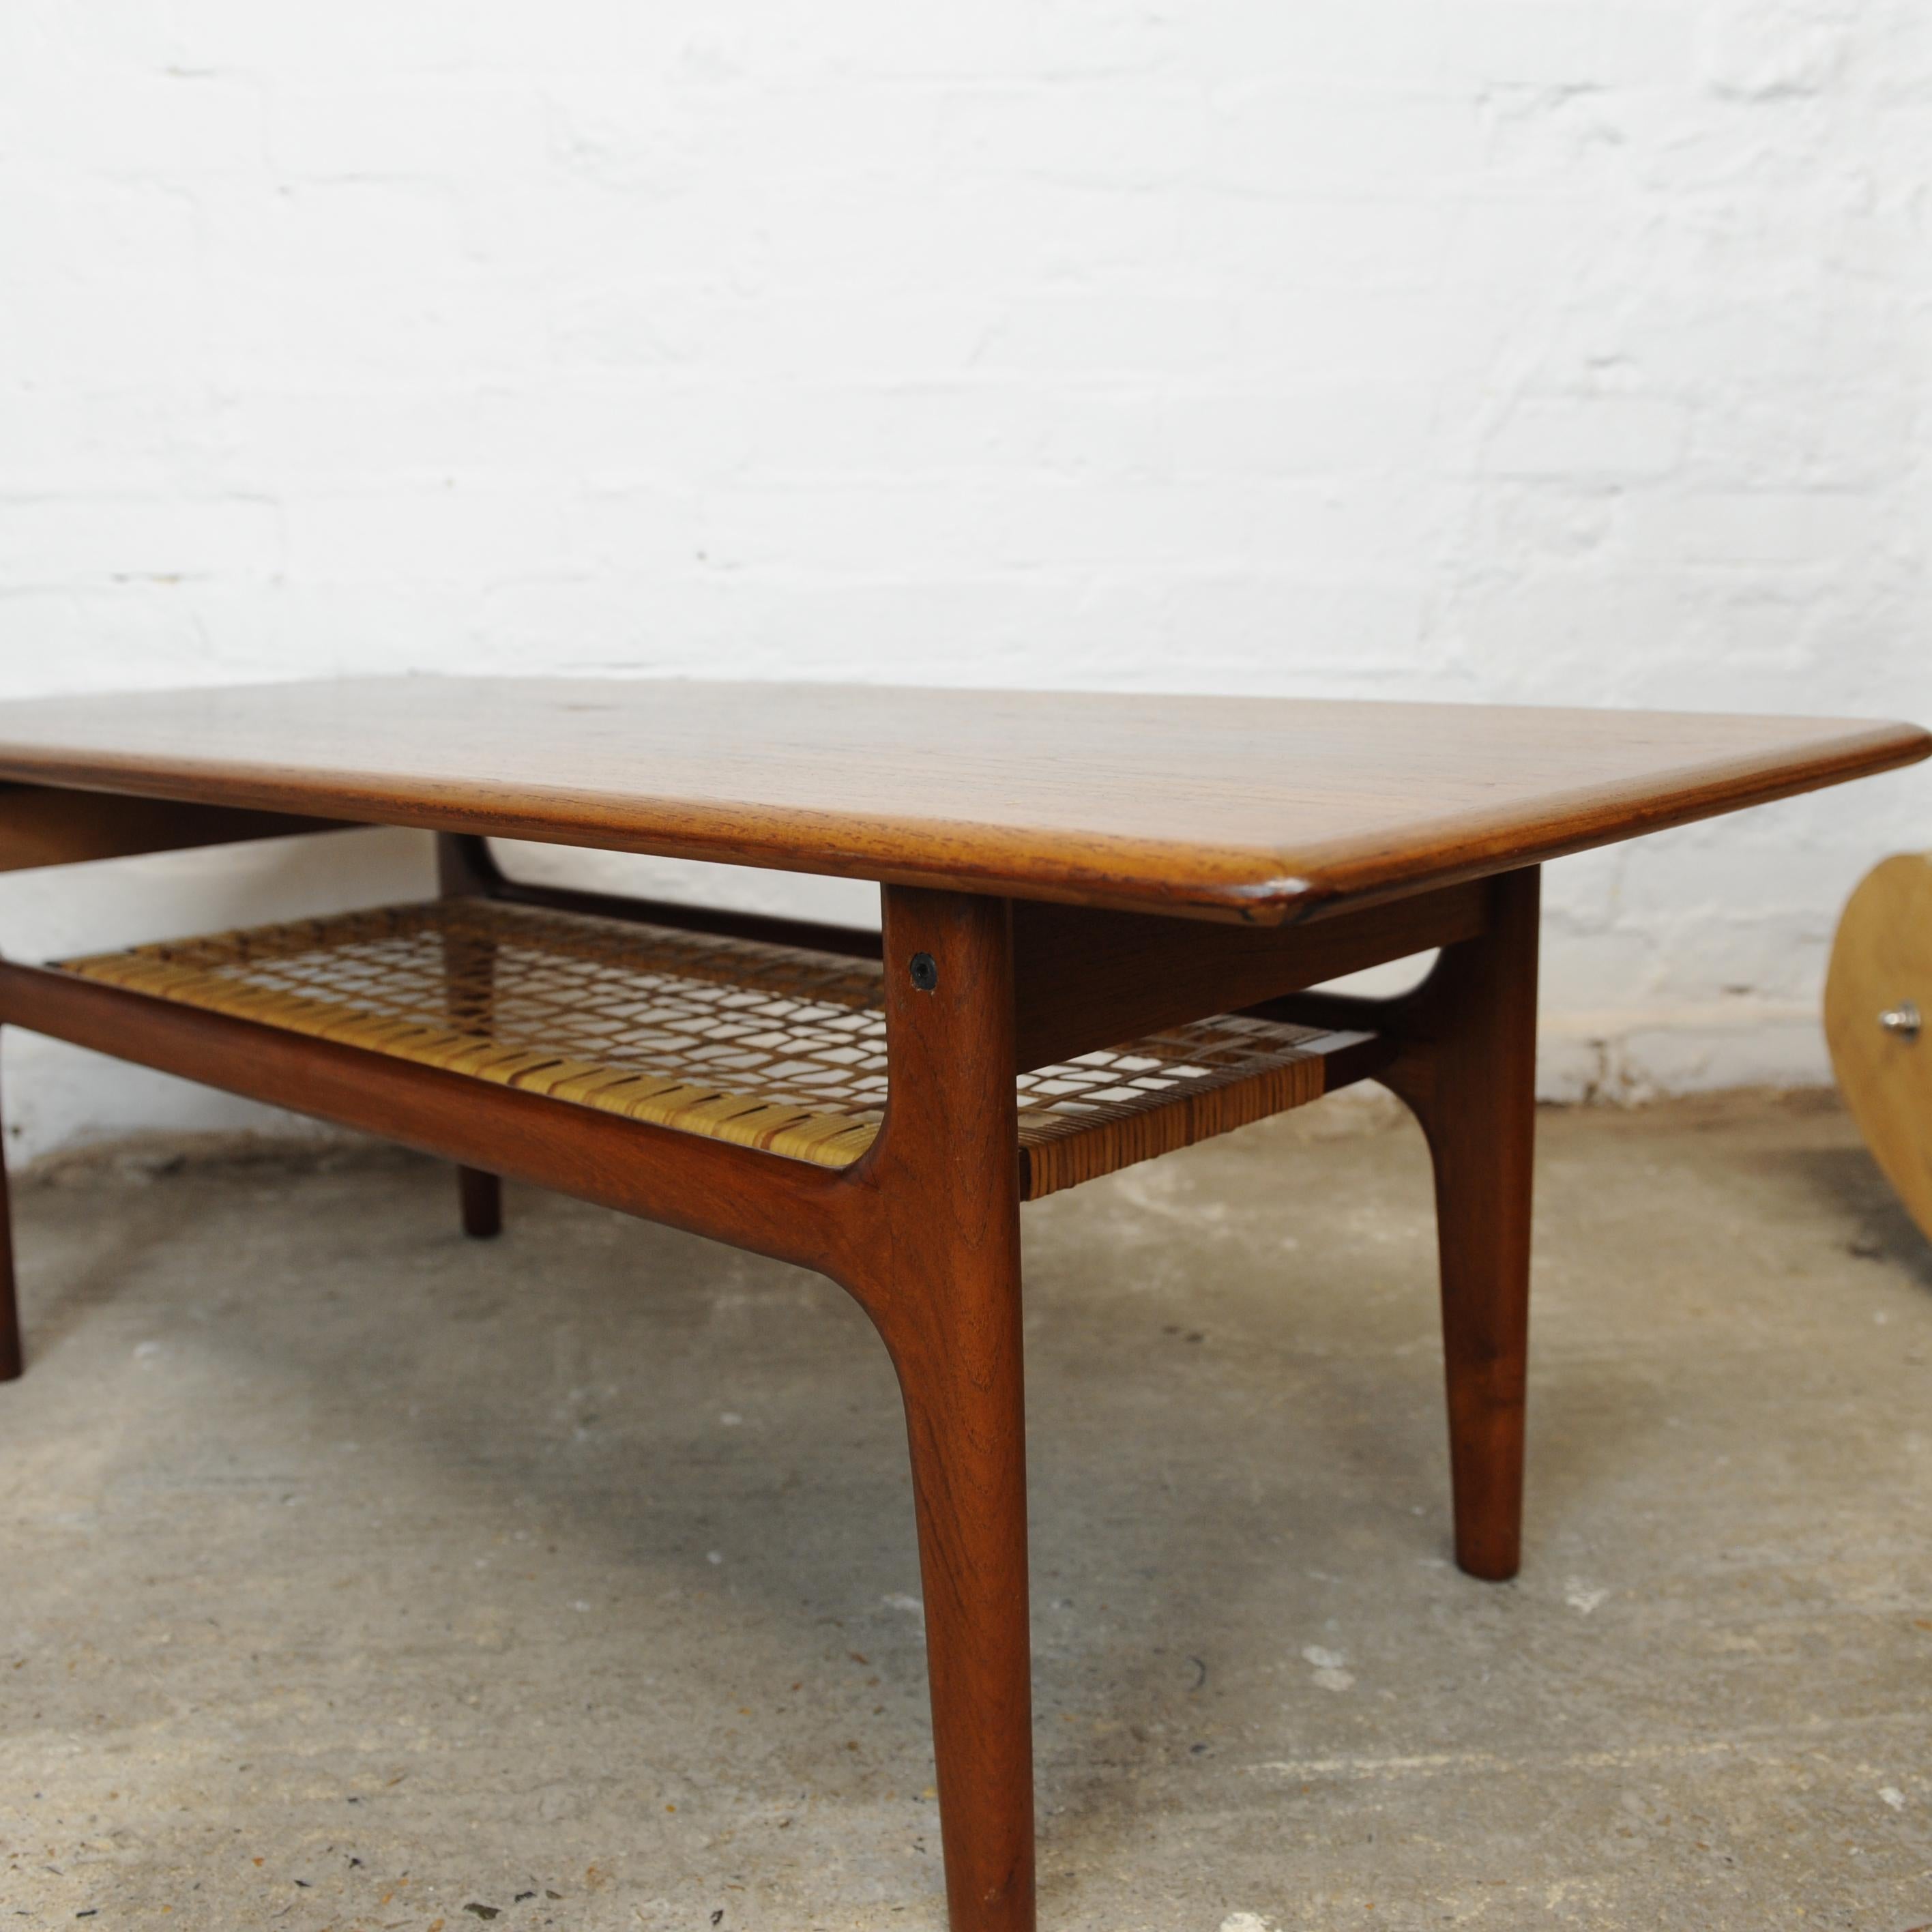 Teak and Cane Danish Coffee Table by Trioh Mobler, 1960s For Sale 6